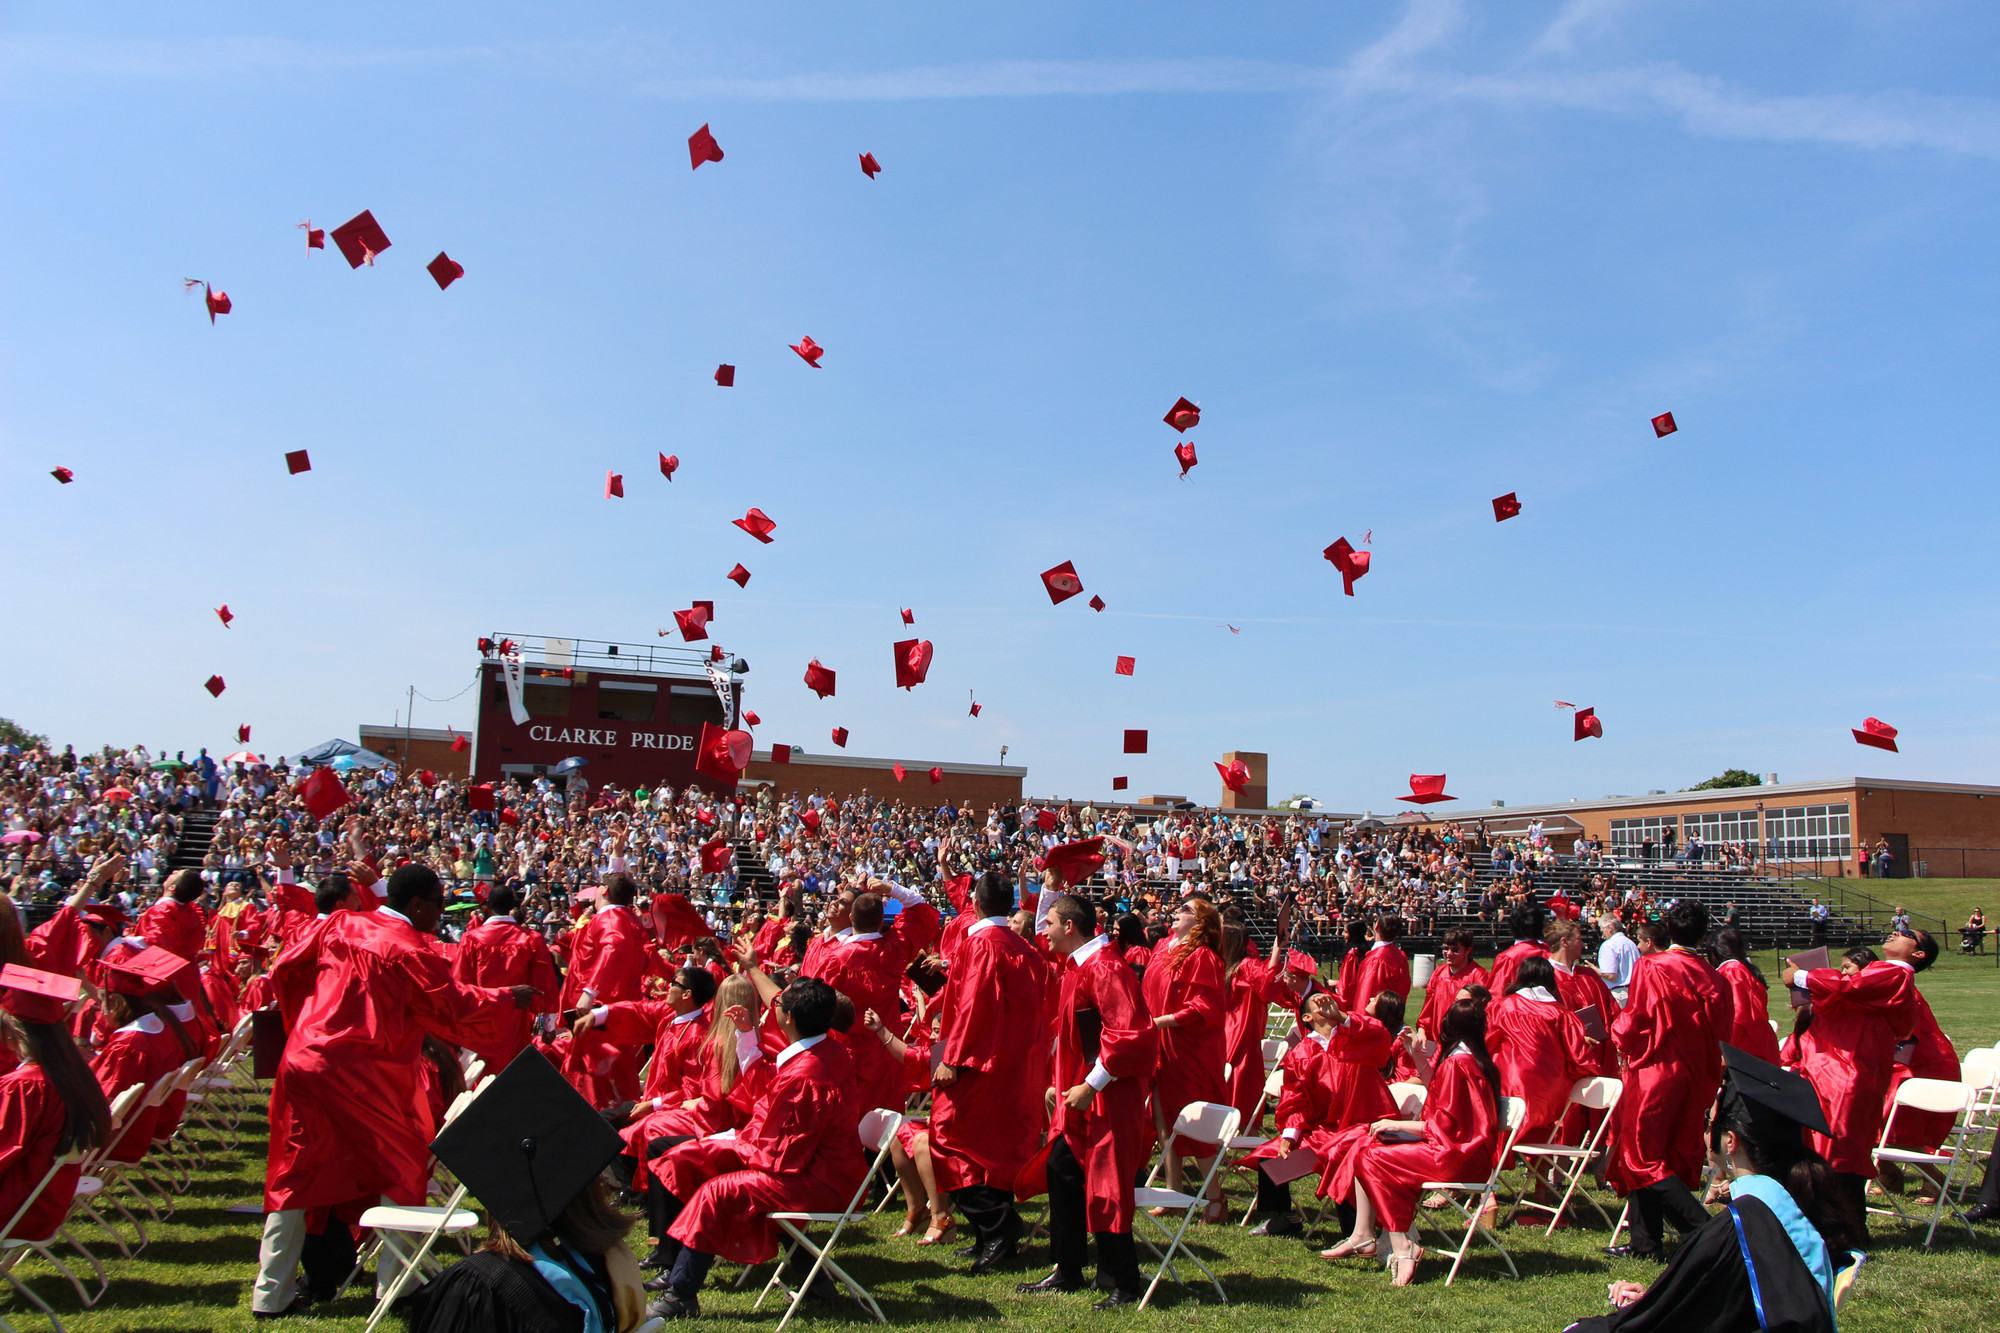 It was Hats Off at W.T. Clarke High School last Sunday as seniors sent their mortarboards flying.